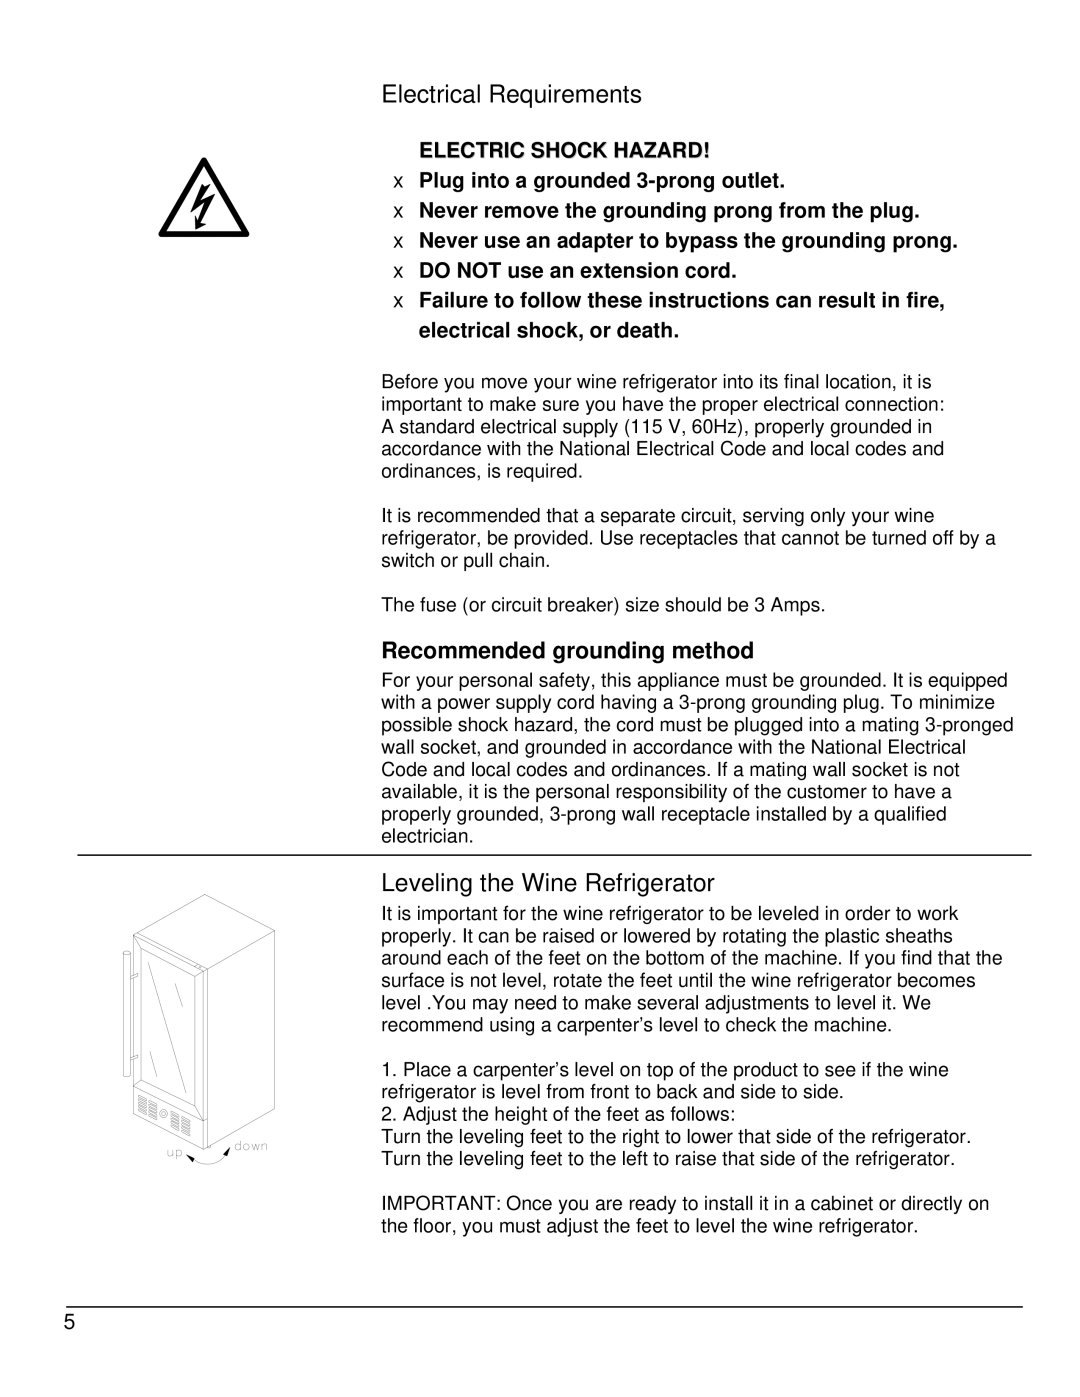 EdgeStar CWR460DZ owner manual Electrical Requirements, Leveling the Wine Refrigerator 